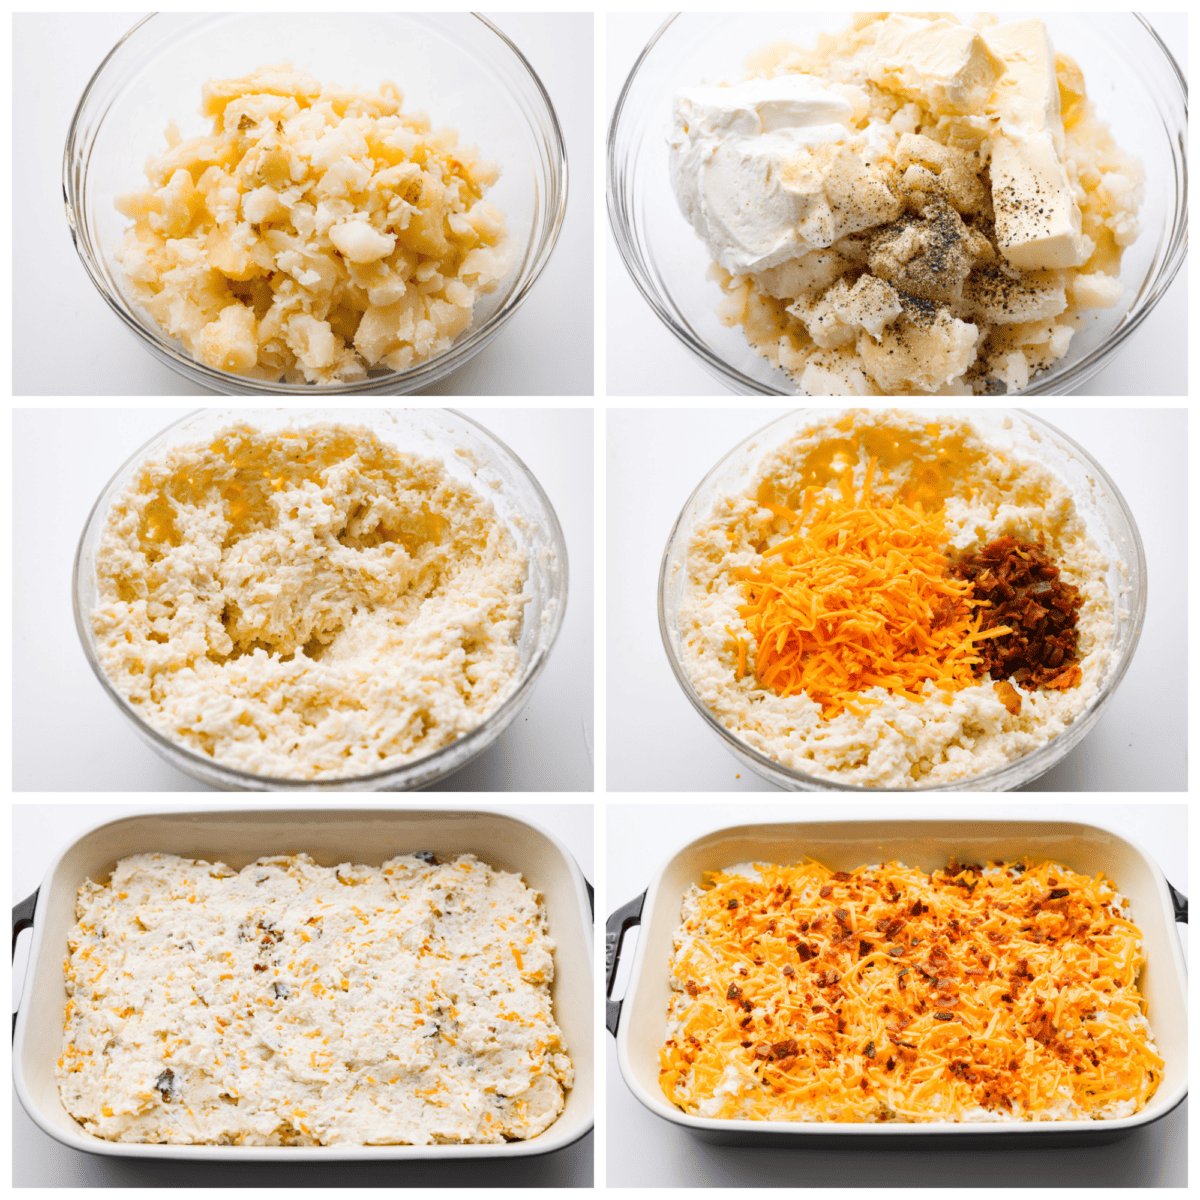 First photo of baked potatoes peeled and placed in a bowl. Second photo of butter, sour cream, milk, and seasonings added to the bowl of potatoes. Third photo of the potato mixture combined. Fourth photo of cheese and bacon added to the potato mixture. Fifth photo of potatoes in casserole dish. Sixth photo of cheese and bacon sprinkled on top before baking.